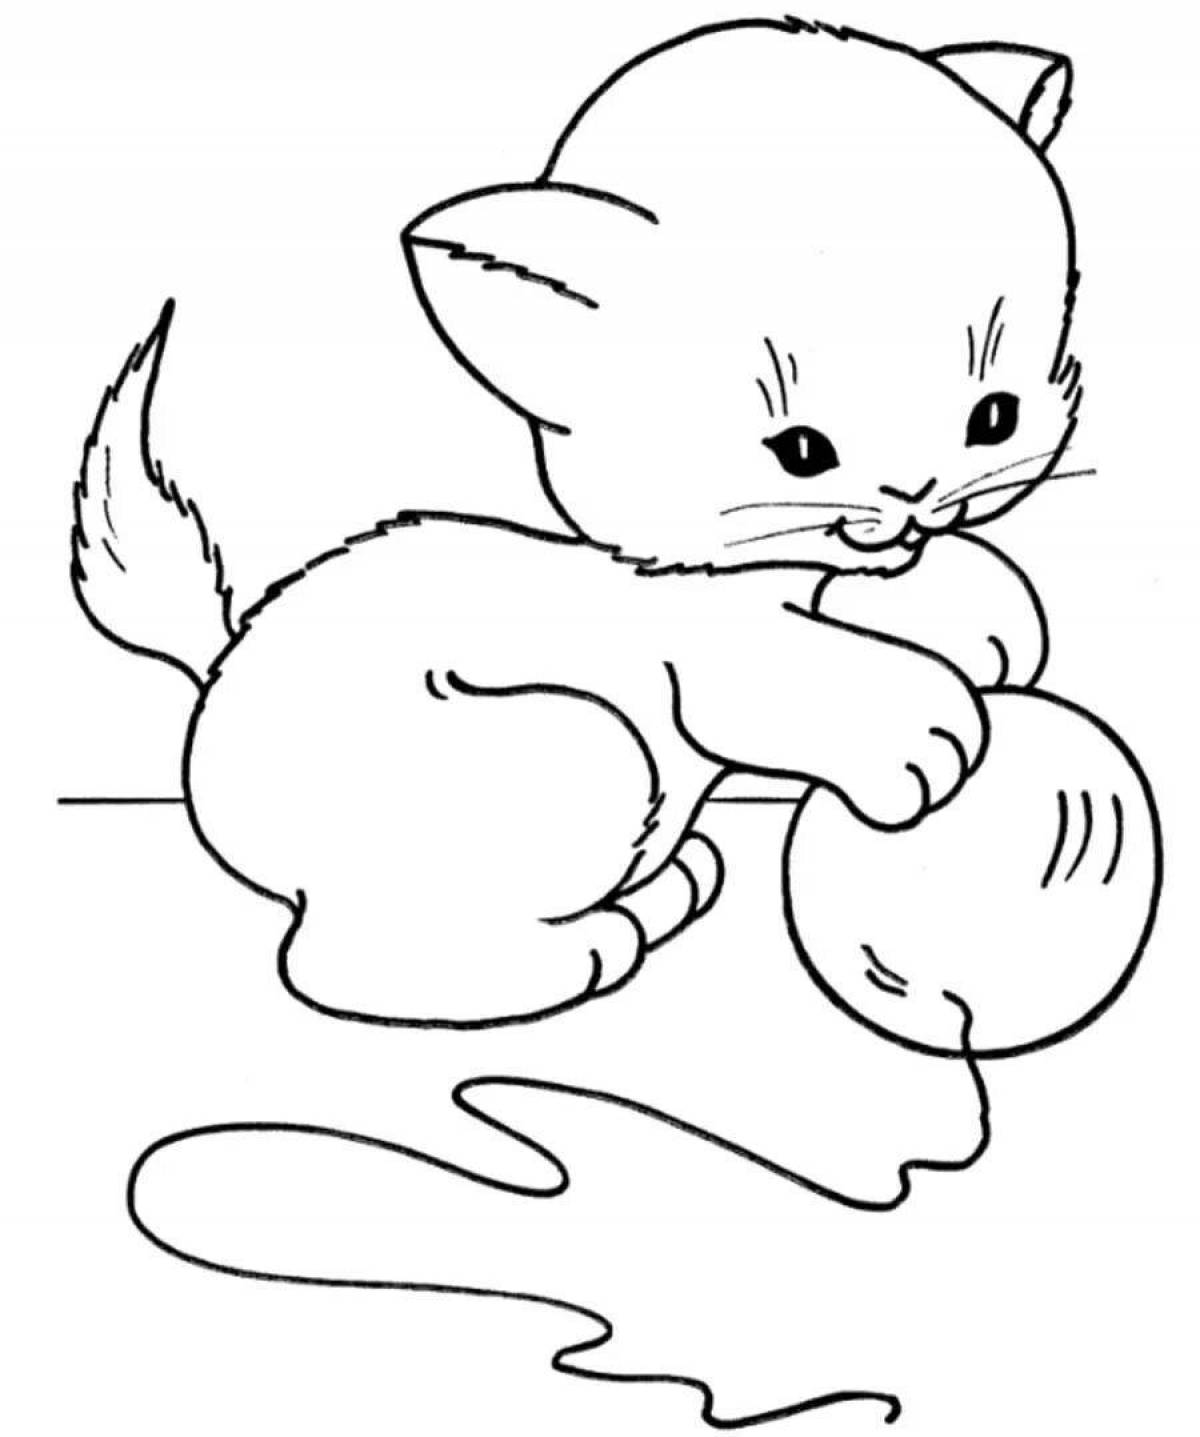 Naughty cat coloring book for children 2-3 years old